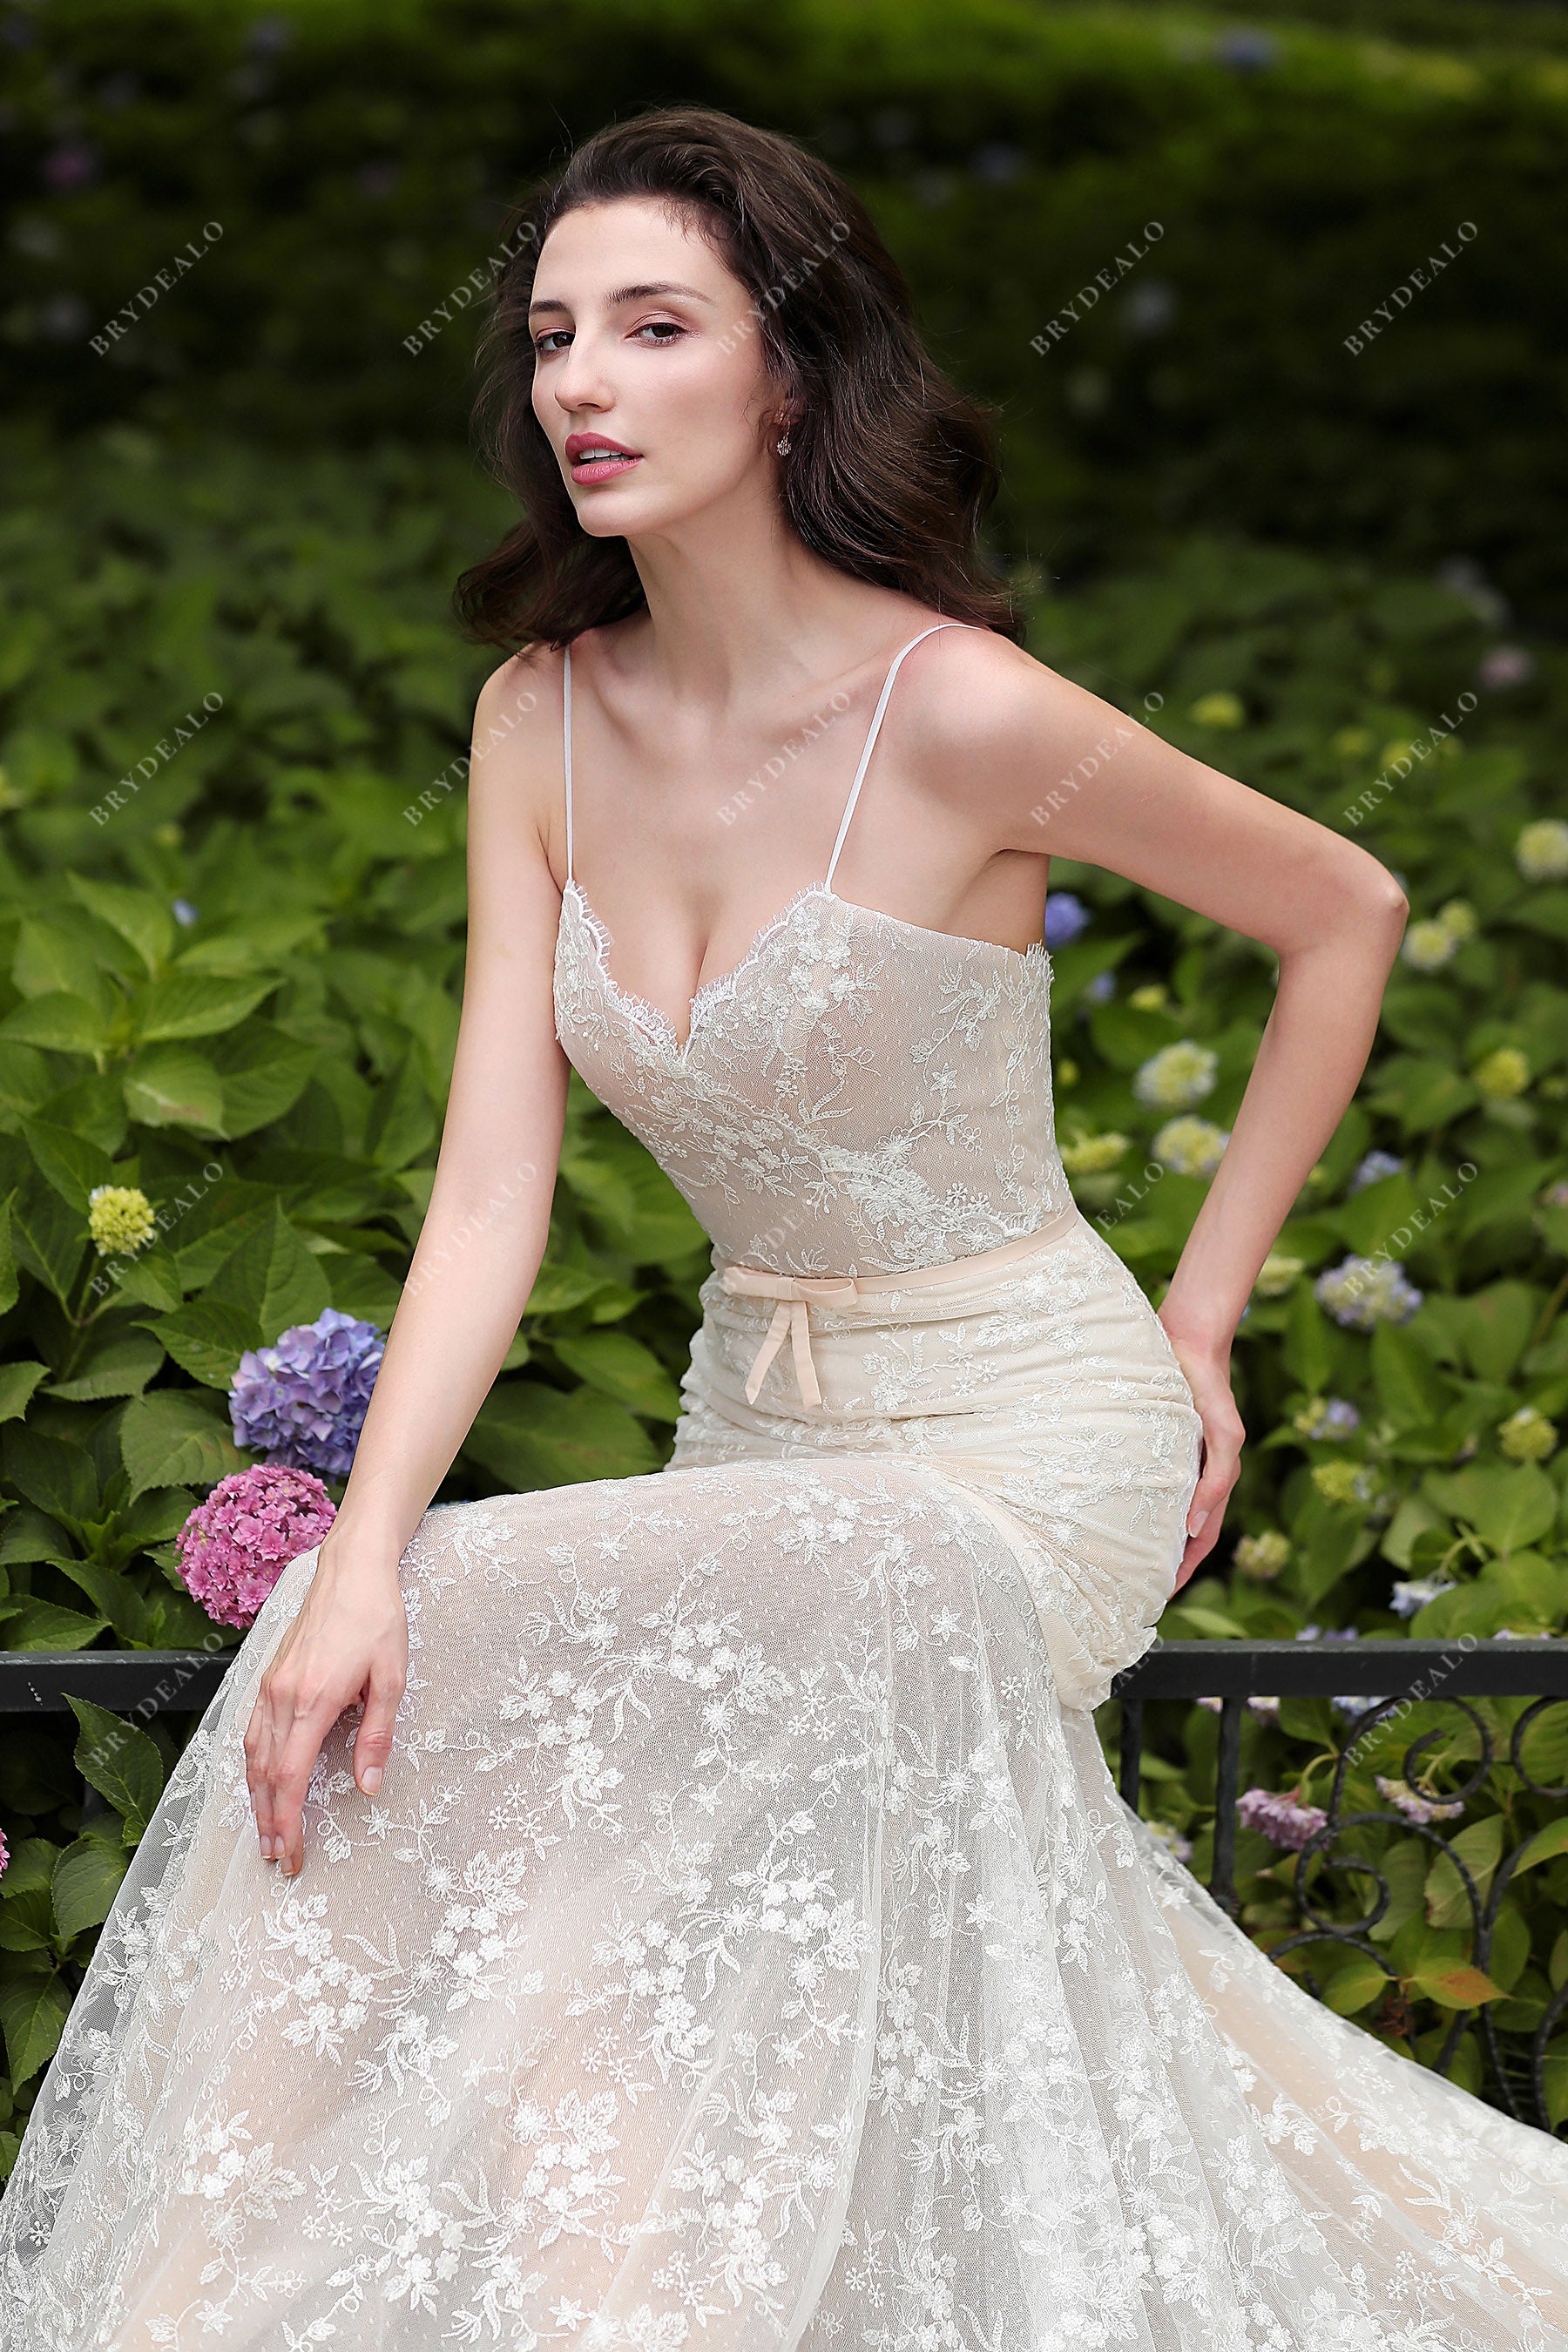 Spaghetti Straps Sweetheart Neck Lace Wedding Gown